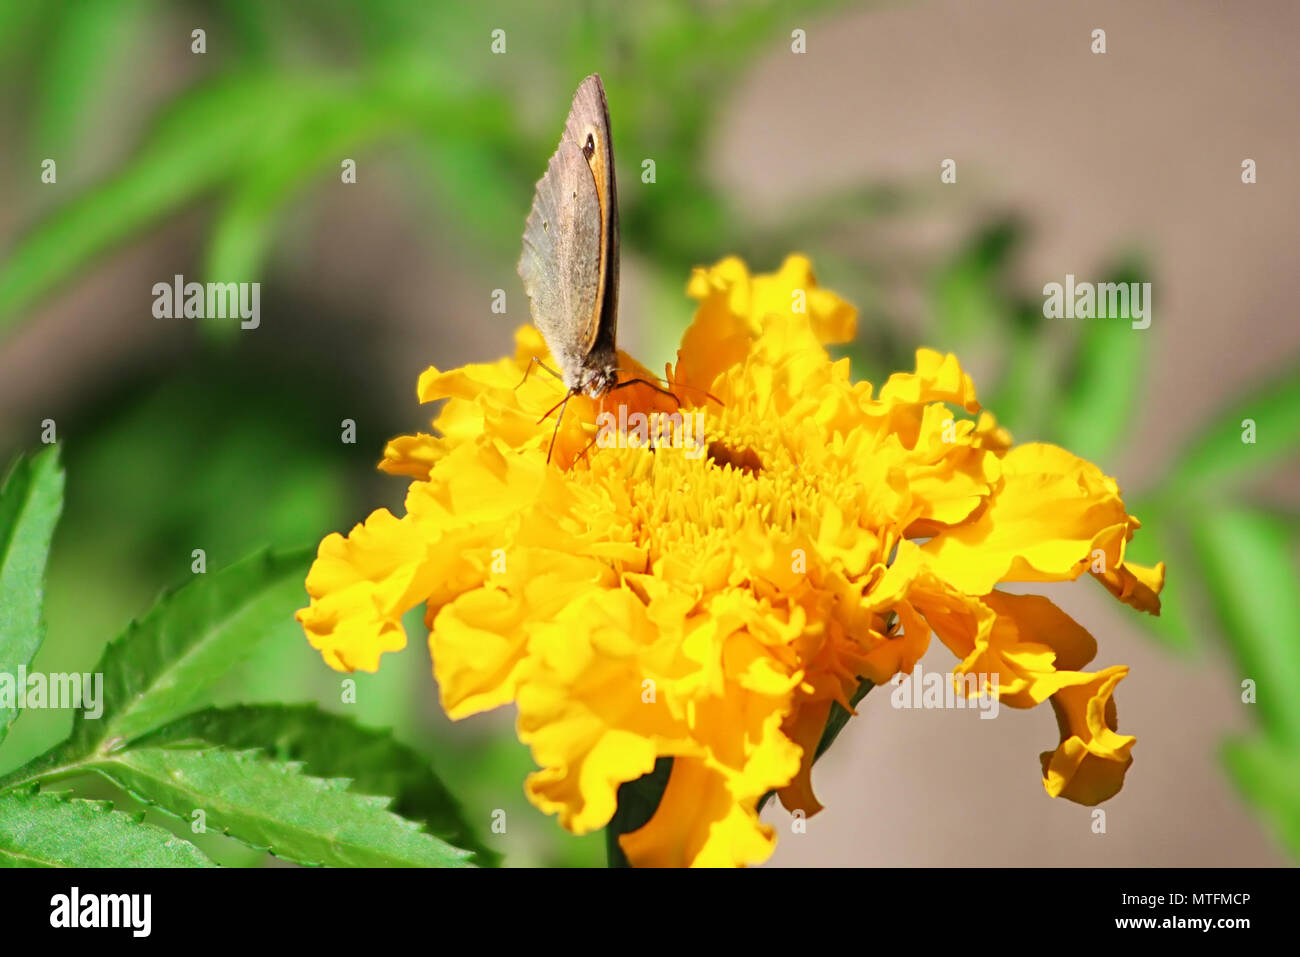 Northern Wall Brown butterfly (Lasiommata petropolitana) on the marigold flower Stock Photo